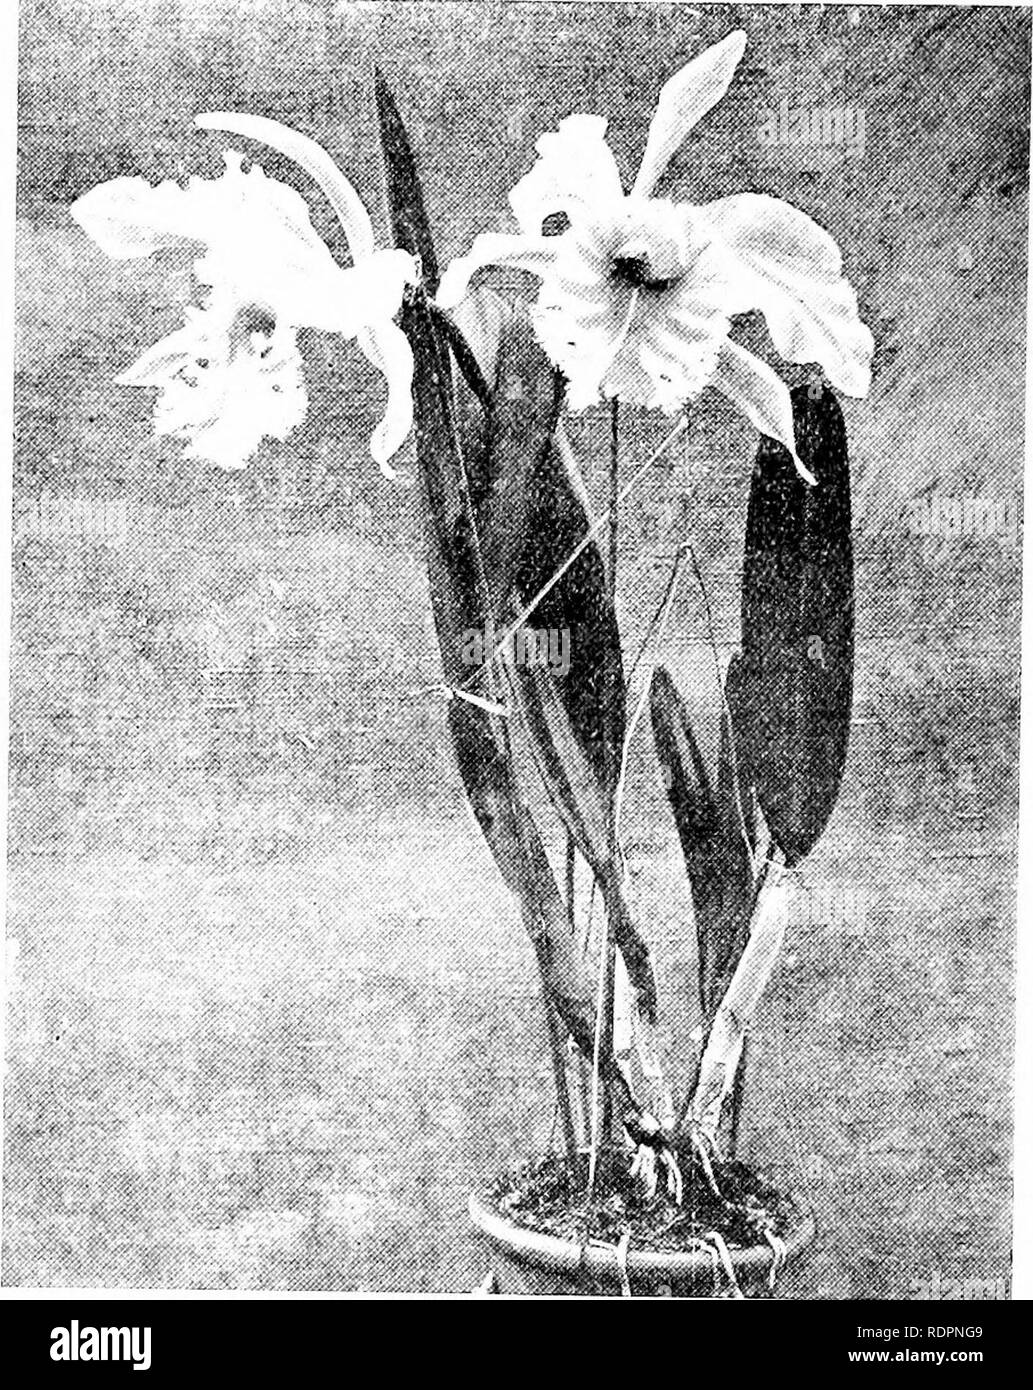 . The orchid stud-book: an enumeration of hybrid orchids of artificial origin, with their parents, raisers, date of first flowering, references to descriptions and figures, and synonymy. With an historical introduction and 120 figures and a chapter on hybridising and raising orchids from seed. Orchids. 46 THE ORCHID STUD-BOOK. Dart II. L.-c. Marona?, O.K. 1901, 329, f. 48. B.-c. .Madame Charles Maron, J.S.H.Fr. 1903, 650. —Garden. .10. B.-c. x Maroni (B. Digbyana x C. Mendelii ?), O./?. 1902, 84, 129, 130.—Maron, 1899. L.-c. &lt; Imperatrice de Russie, G.C. 1899, i. 174; O.K. 1899, 127: Rev. H Stock Photo